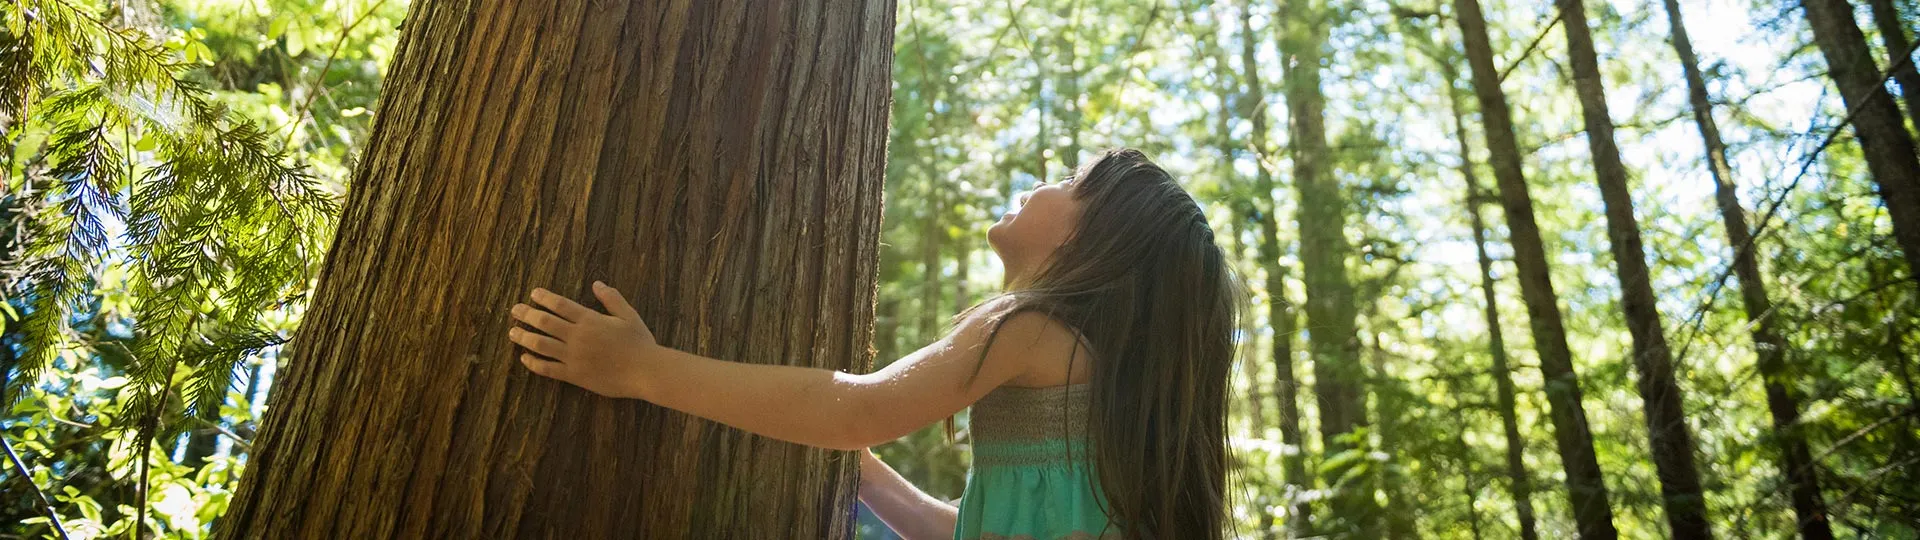 Submit a project - Child in a forest > La Fondation Dassault Systèmes